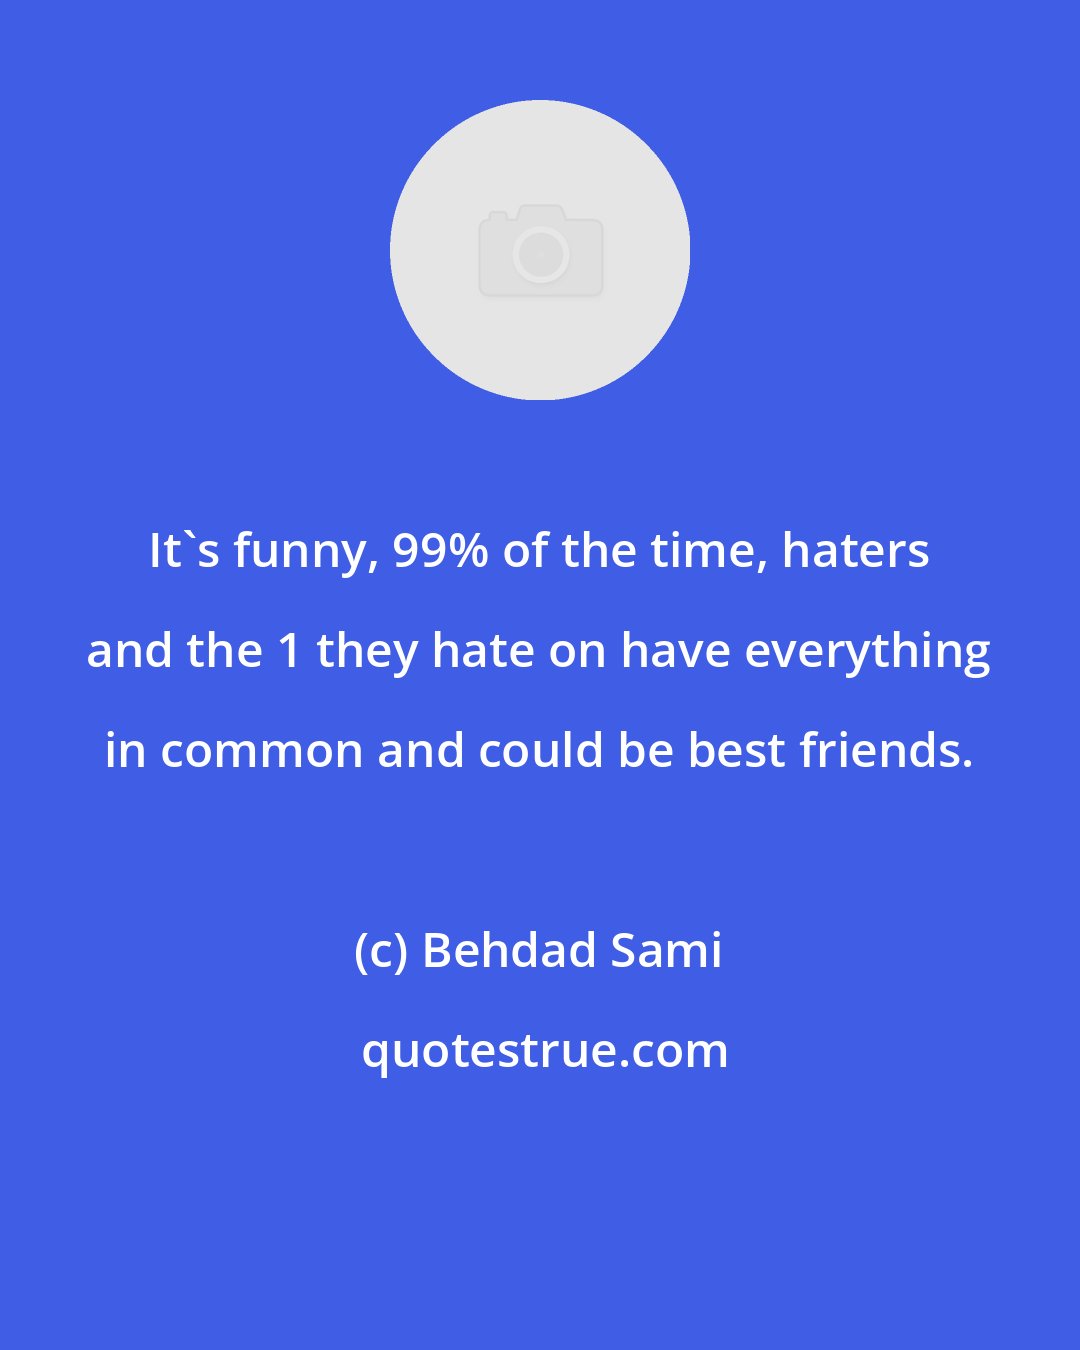 Behdad Sami: It's funny, 99% of the time, haters and the 1 they hate on have everything in common and could be best friends.